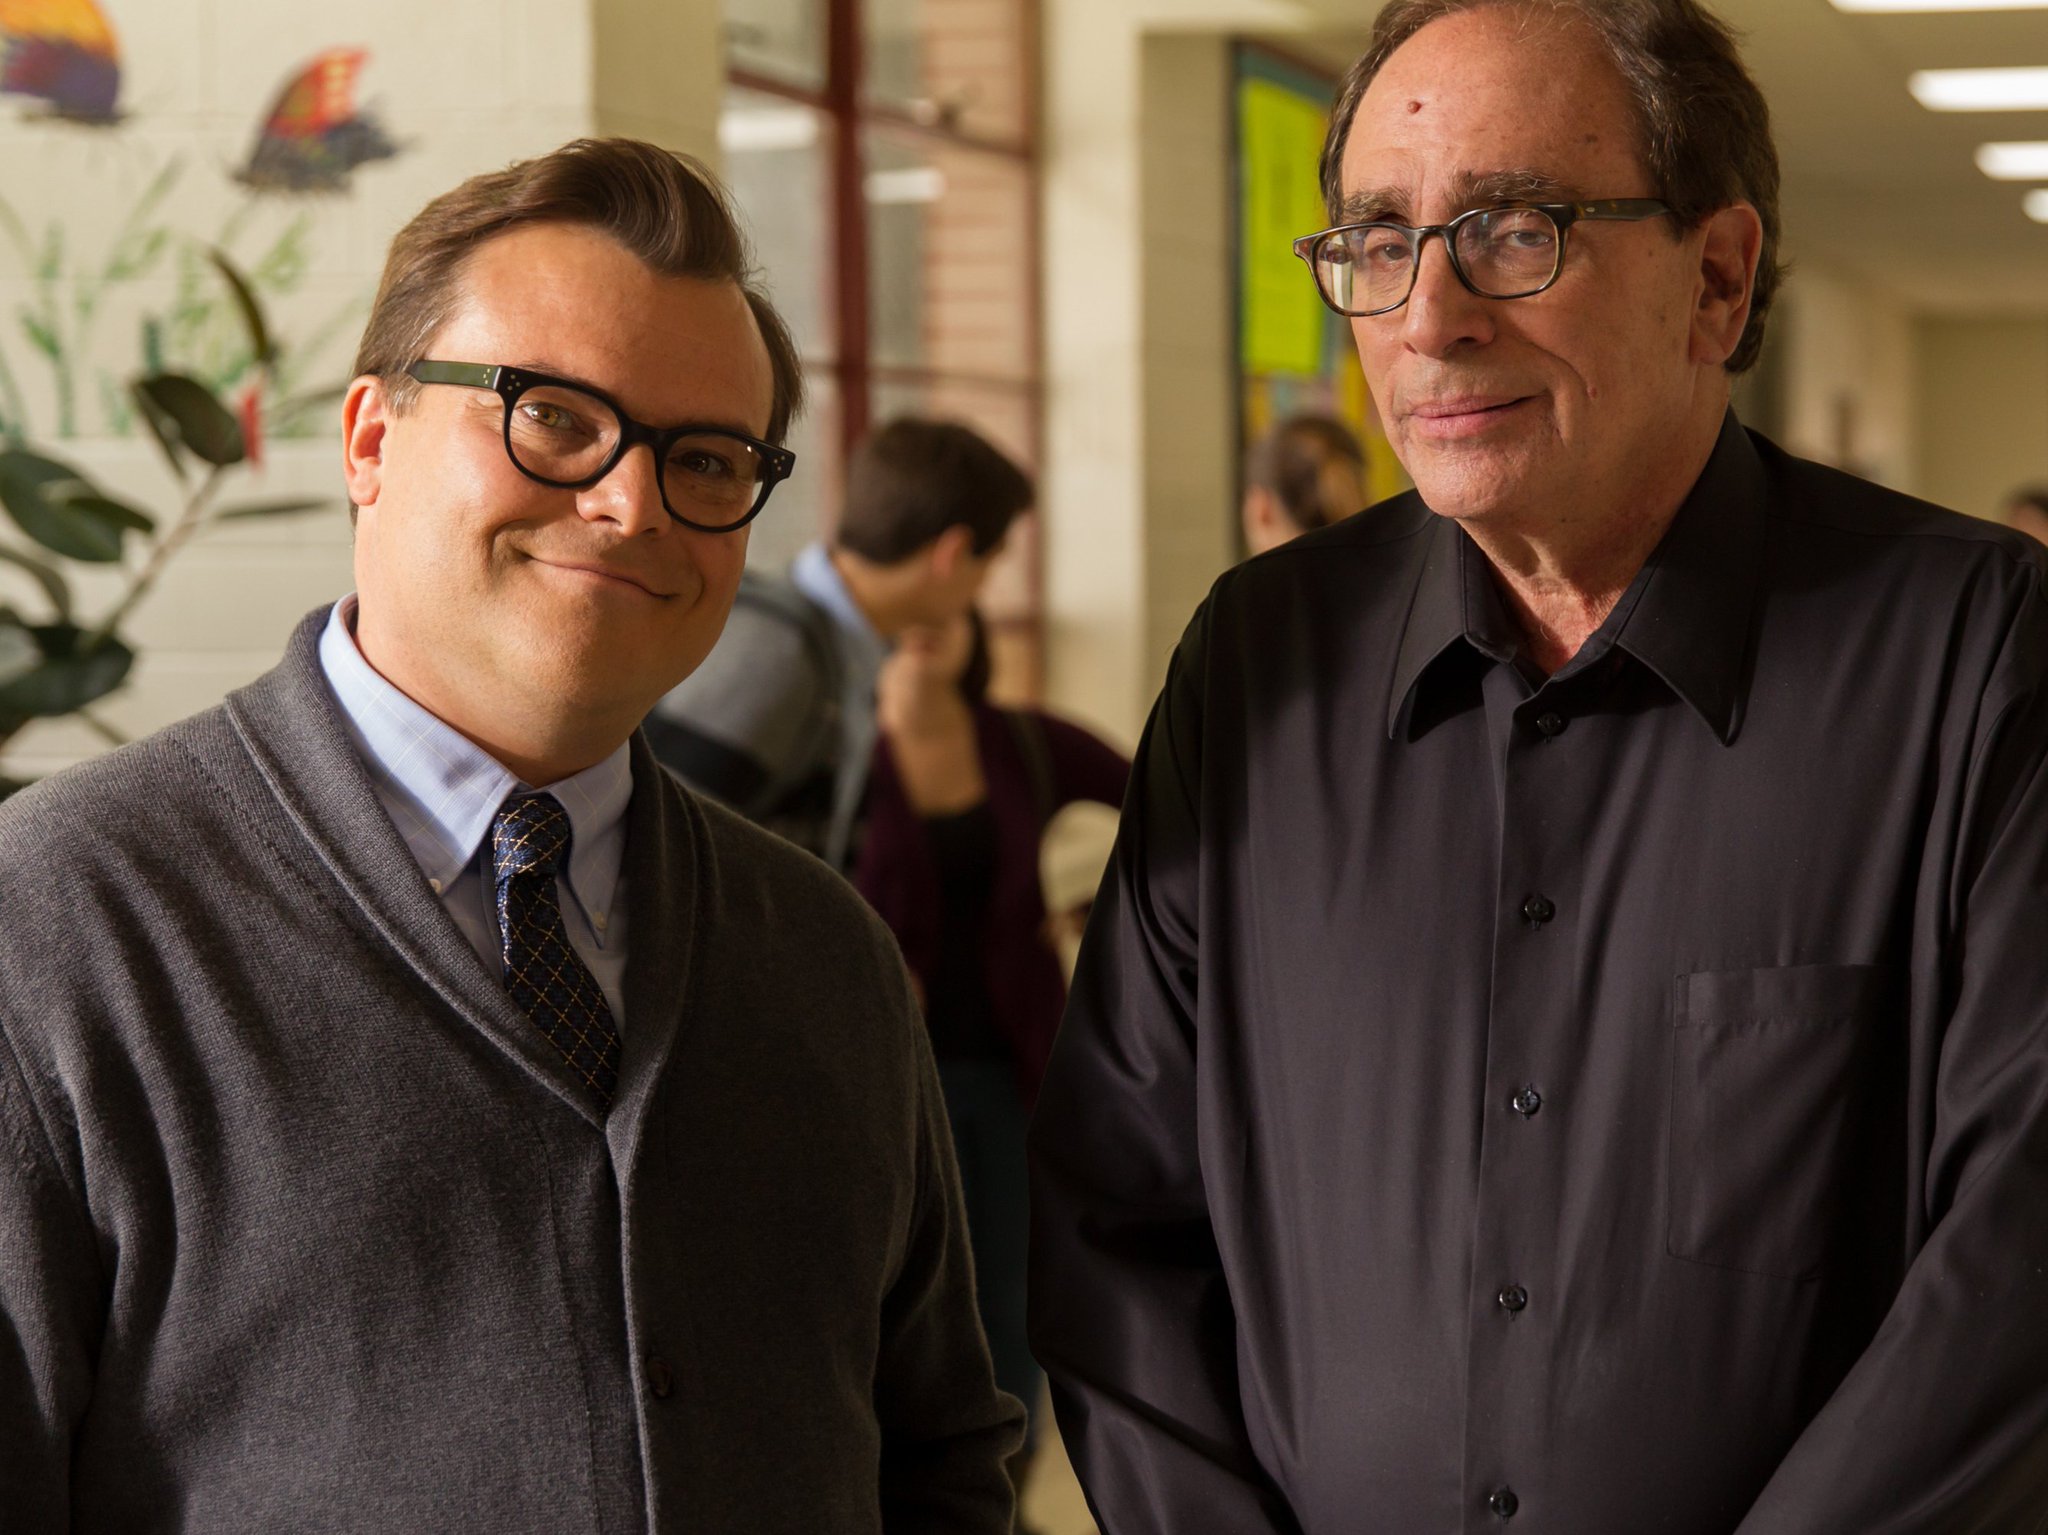 Happy Birthday to R.L. Stine(right) who turns 74 today! 